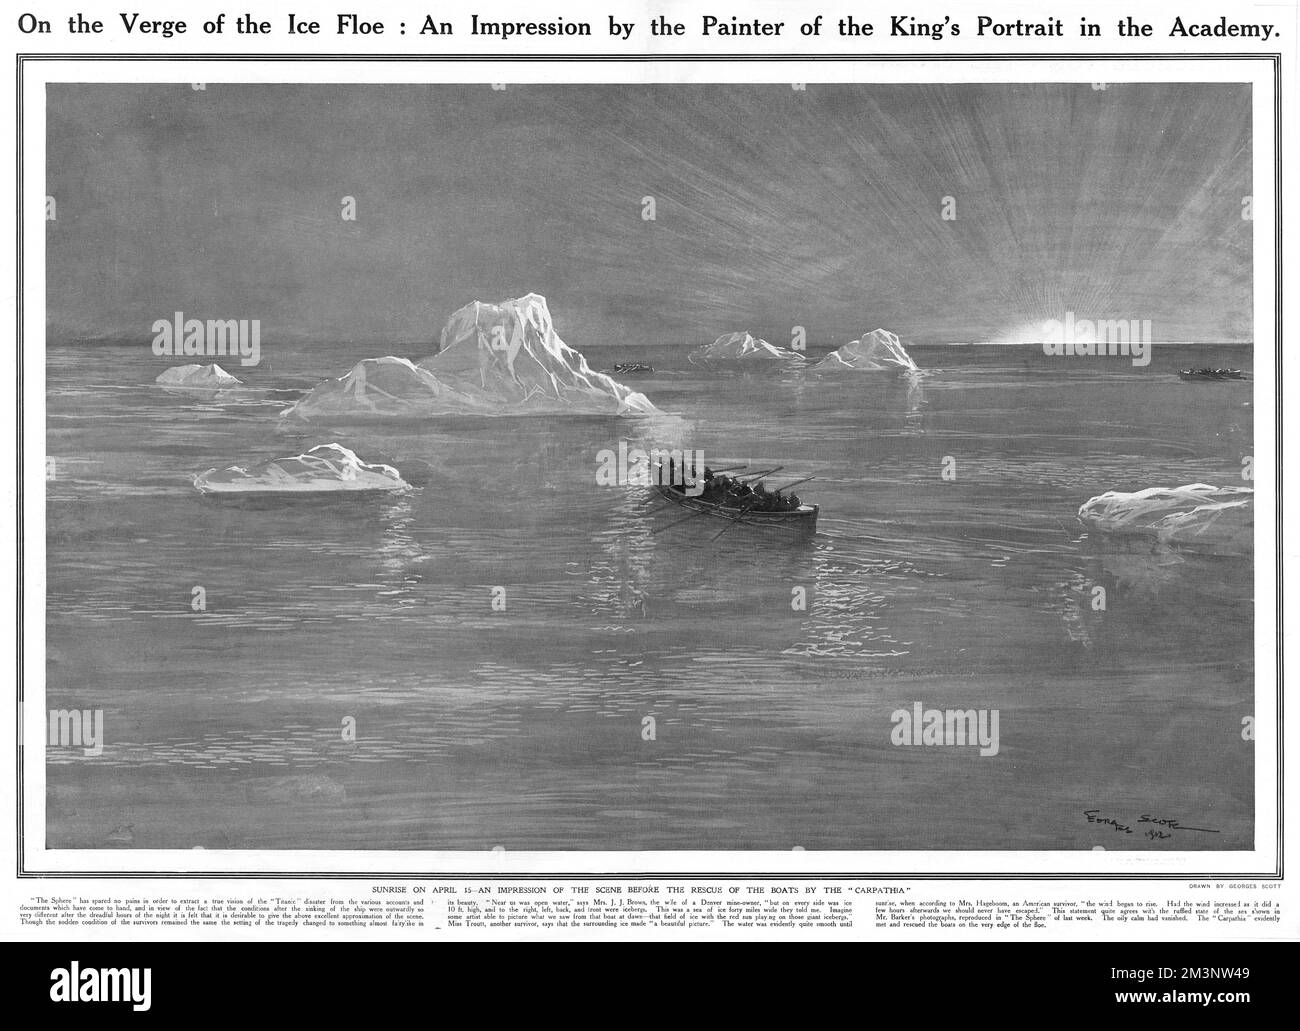 On the verge of the ice floe.  A tranquil, yet eery impression of the area of the Atlantic ocean where the White Star passenger liner, RMS Titanic sank the morning after, with lifeboats containing survivors, rowing through the ice, before their rescue by the Carpathia.     Date: 1912 Stock Photo